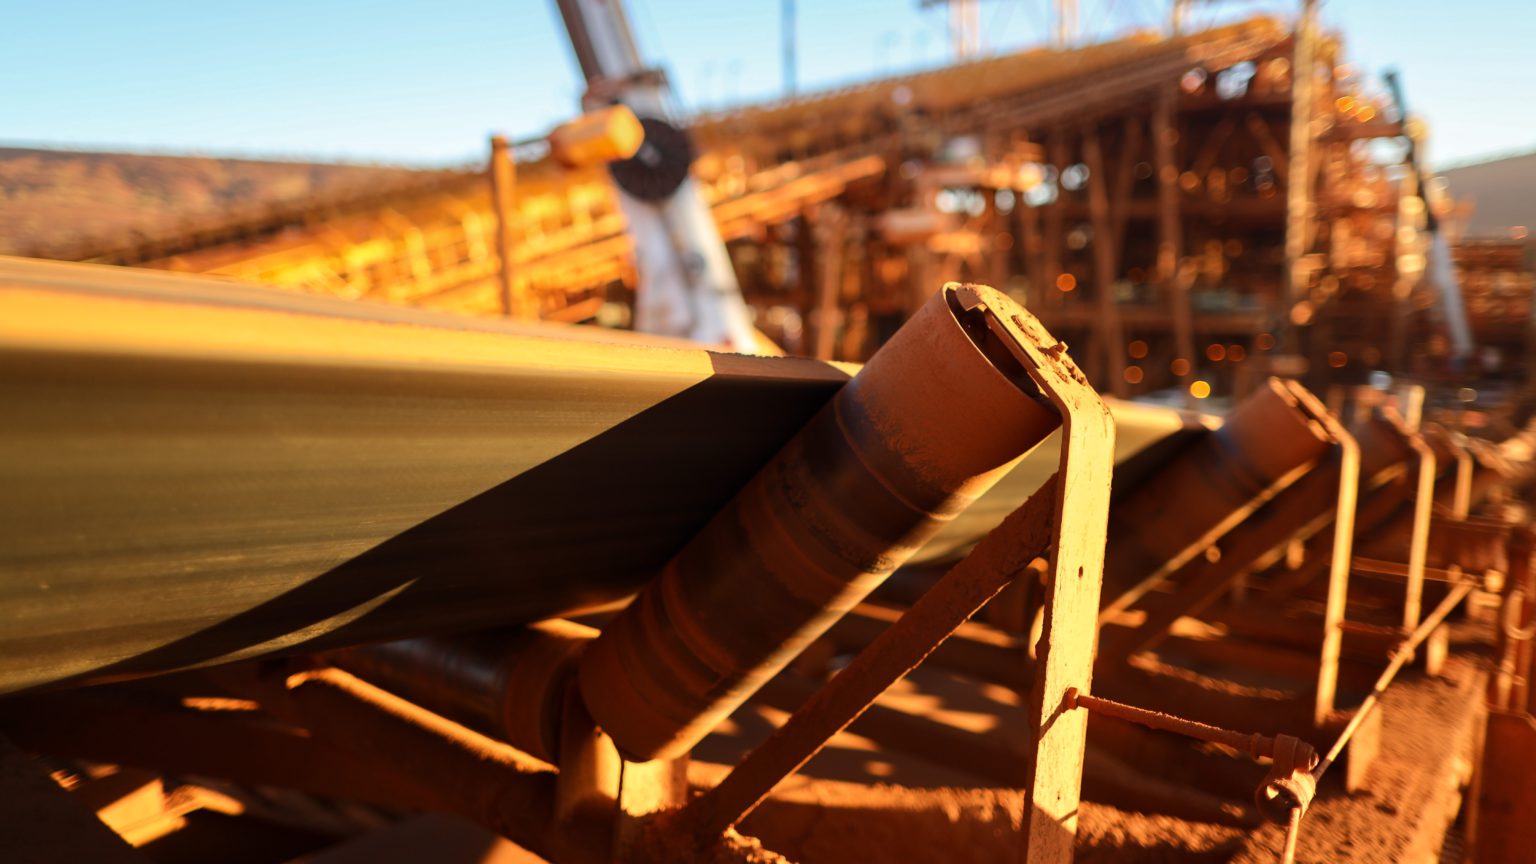 Sinosteel signs $690 million deal for Cameroon iron ore mine